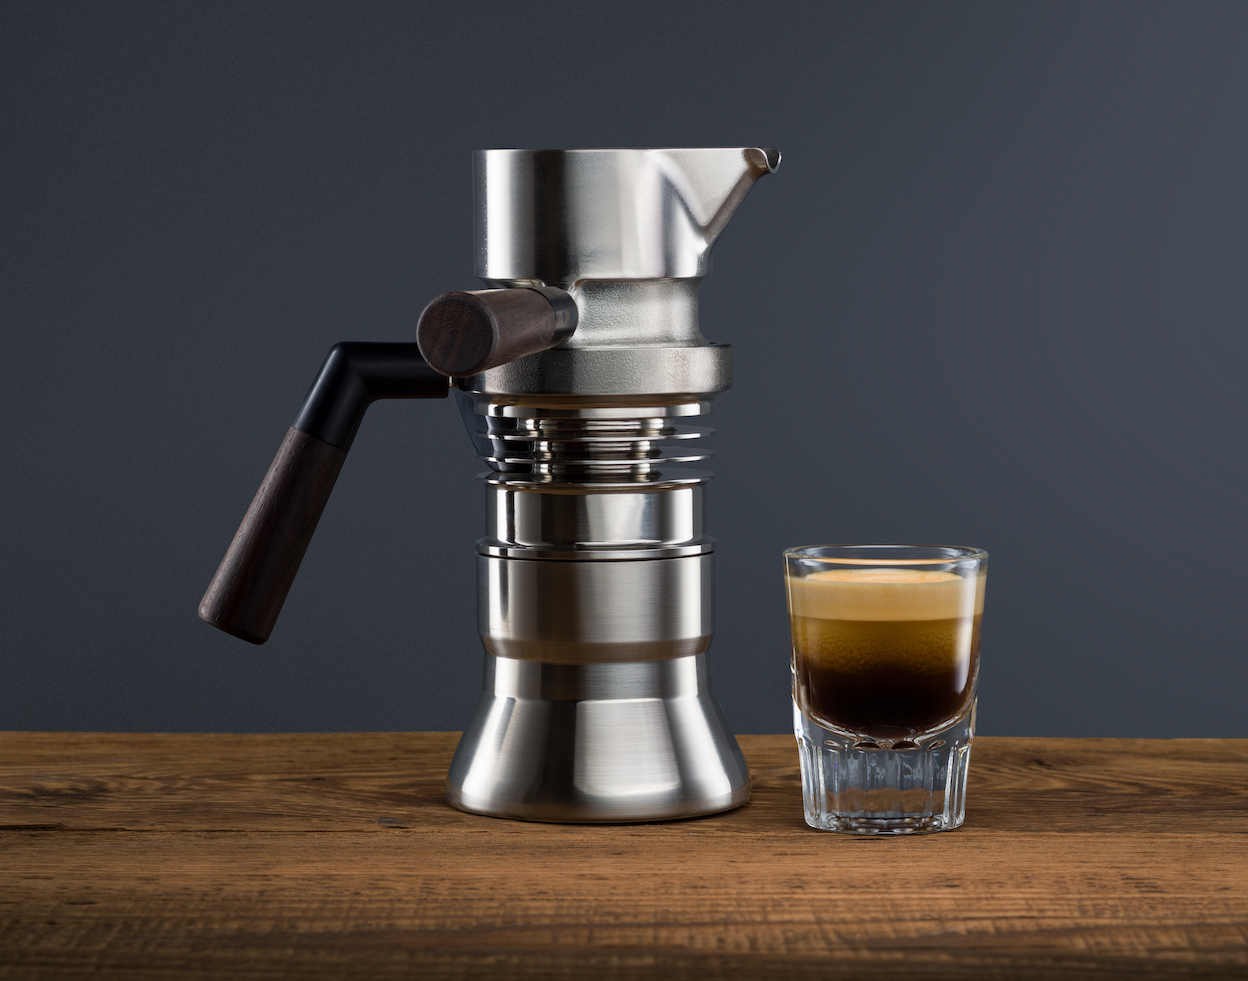 THIRD WAVE COFFEE MEETS TRADITION: THE NEAPOLITAN COFFEE MAKER